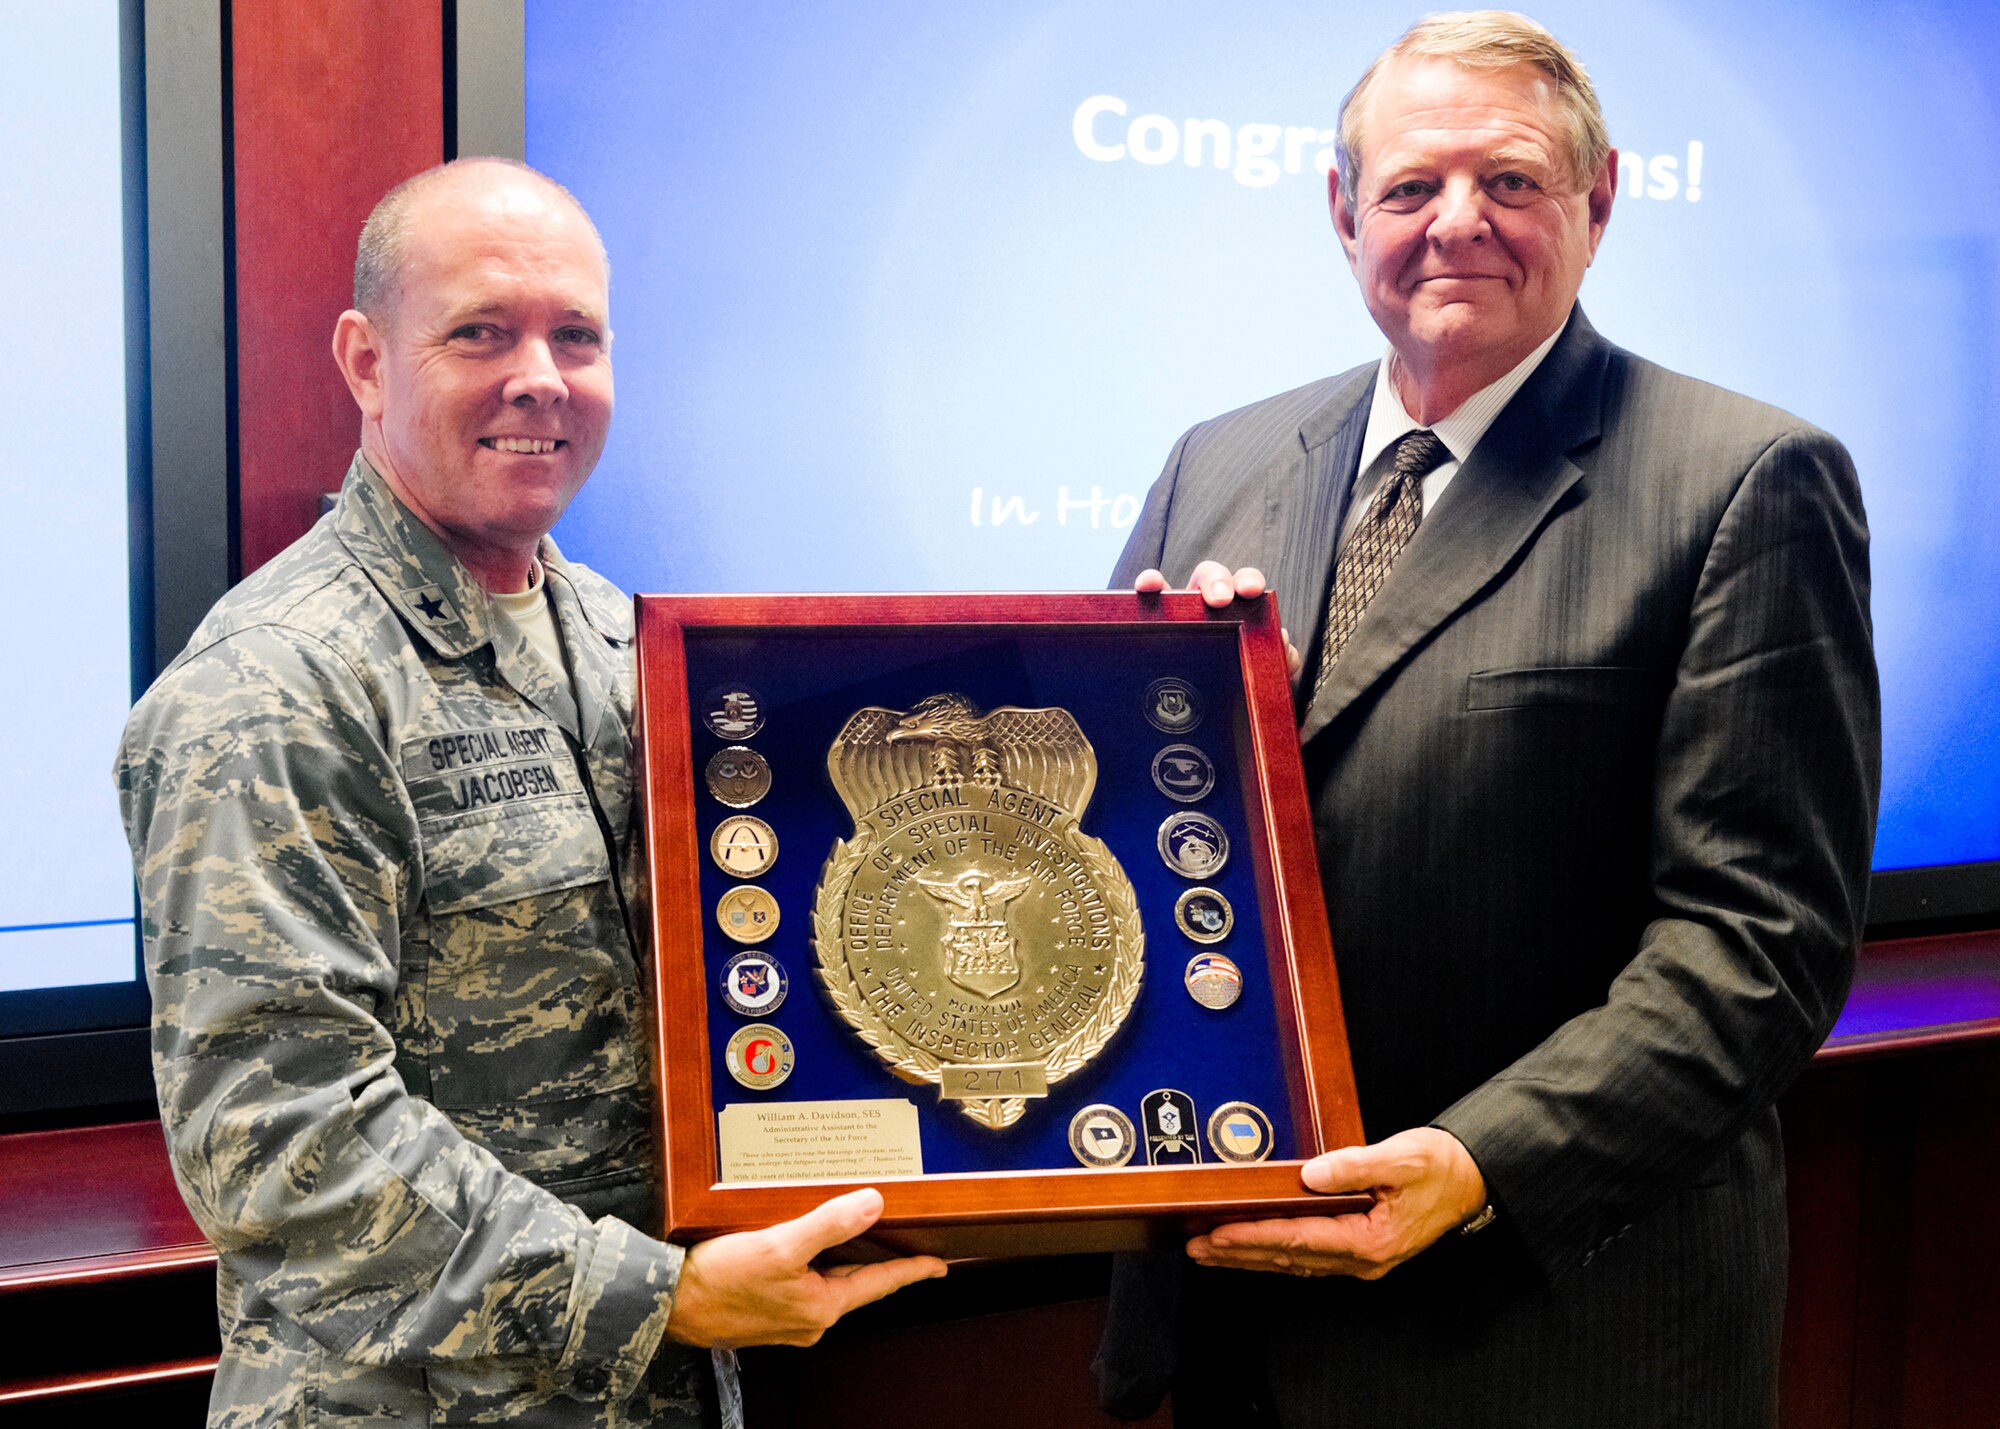 Administrative Assistant to the Secretary of the Air Force, Mr. William A. Davidson accepts a shadow box from Brig. Gen. Kevin Jacobsen, AFOSI commander. Mr. Davidson, a former OSI agent, received a special tour of the AFOSI Headquarters at Marine Corps Base Quantico, Va., Sept. 23. During his tour of the headquarters, OSI also announced the re-naming of the Investigations Collections Operations Nexus conference room to the William A. Davidson Conference Room. A special display featuring Mr. Davidson's Air Force career was unveiled for him and his wife, Peg, to mark the occasion. (U.S. Air Force Photo by Mr. Mike Hastings.)